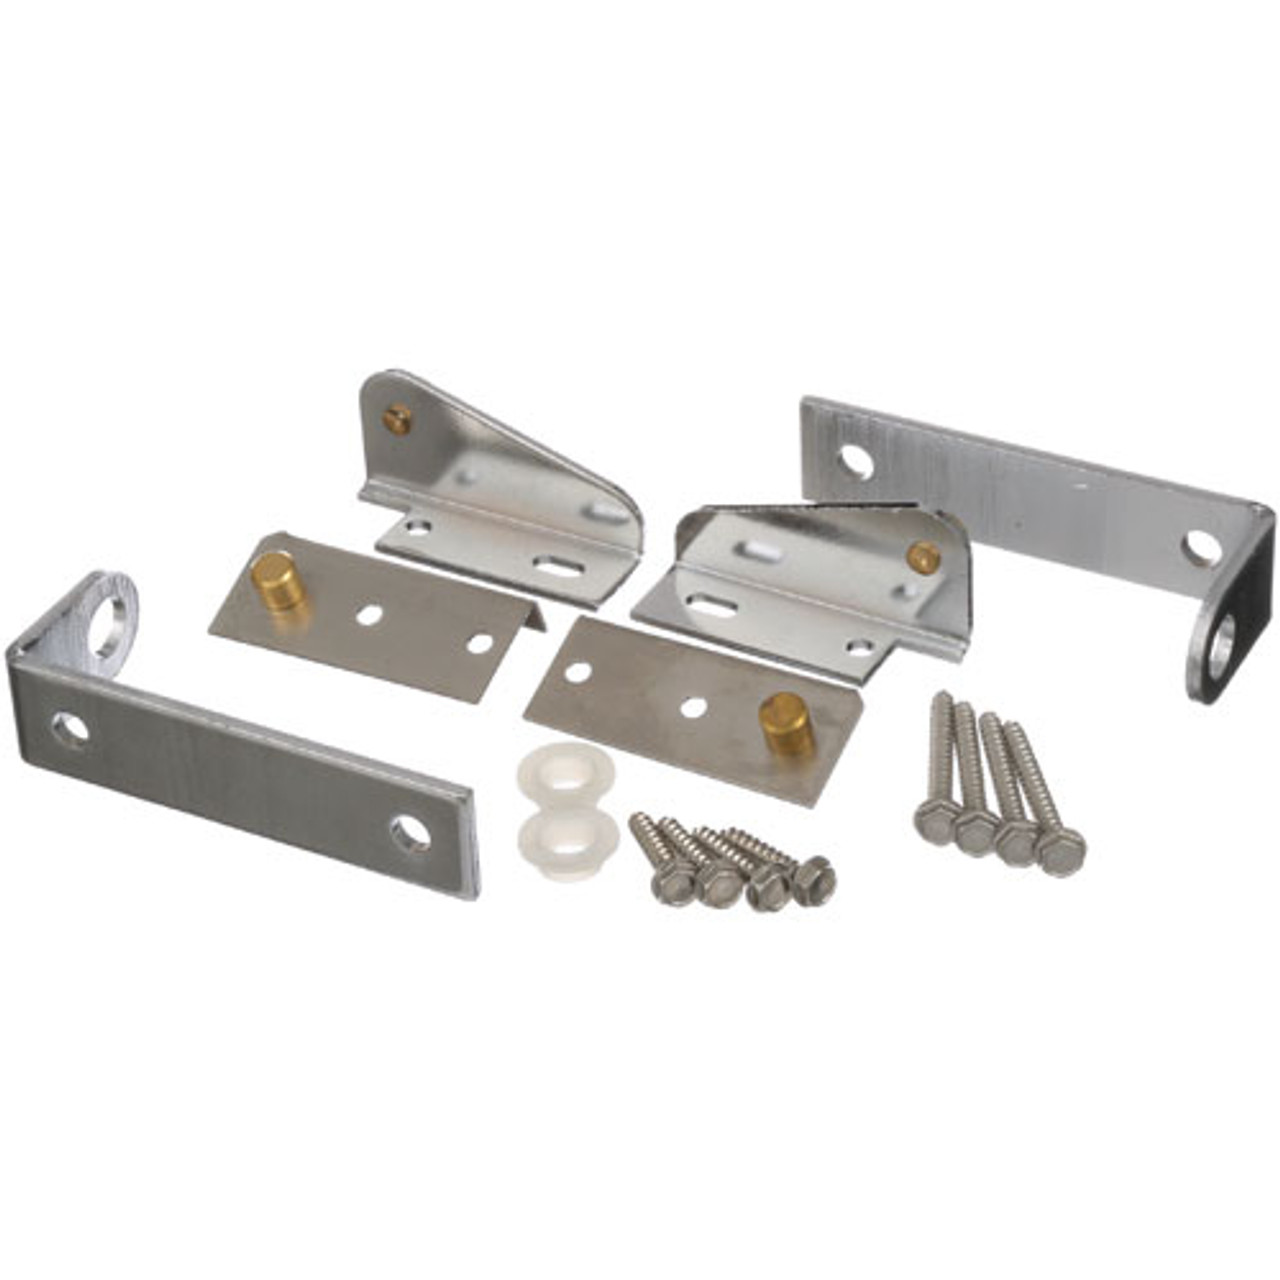 Hinge Kit - Replacement Part For Delfield 330162